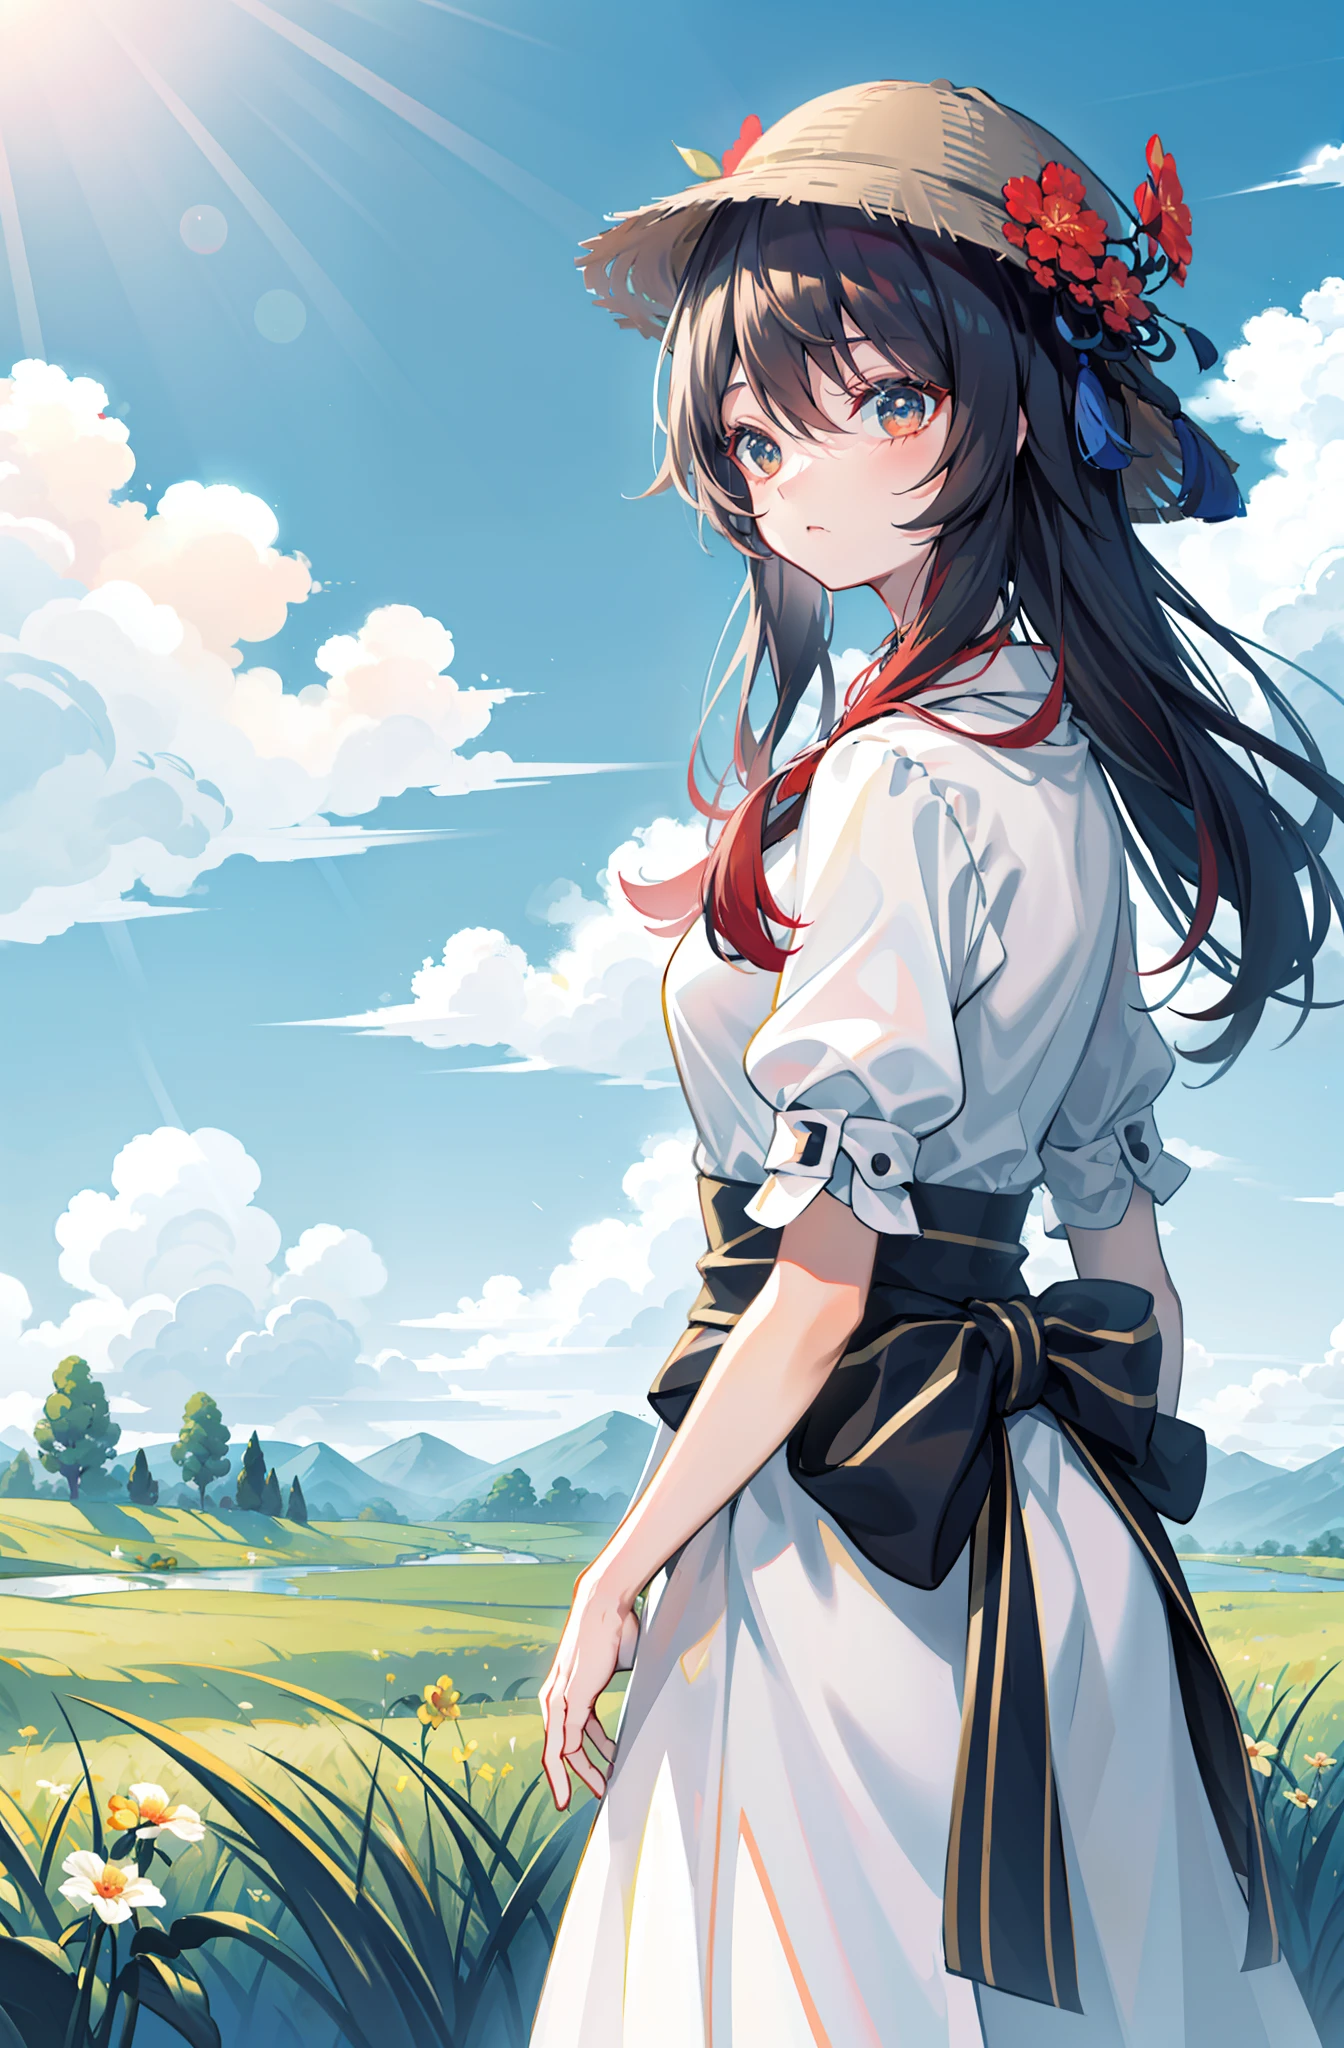 Hu tao from genshin impact, white background, casual outfit, cute pose, Prairie, a beauty with a sunhat standing on the prairie, big clouds, blue sky, meadow, forest, hillside, secluded, tourist attraction, HD detail, hyper-detail, cinematic, surrealism, soft light, deep field focus bokeh, ray tracing and surrealism. --v6